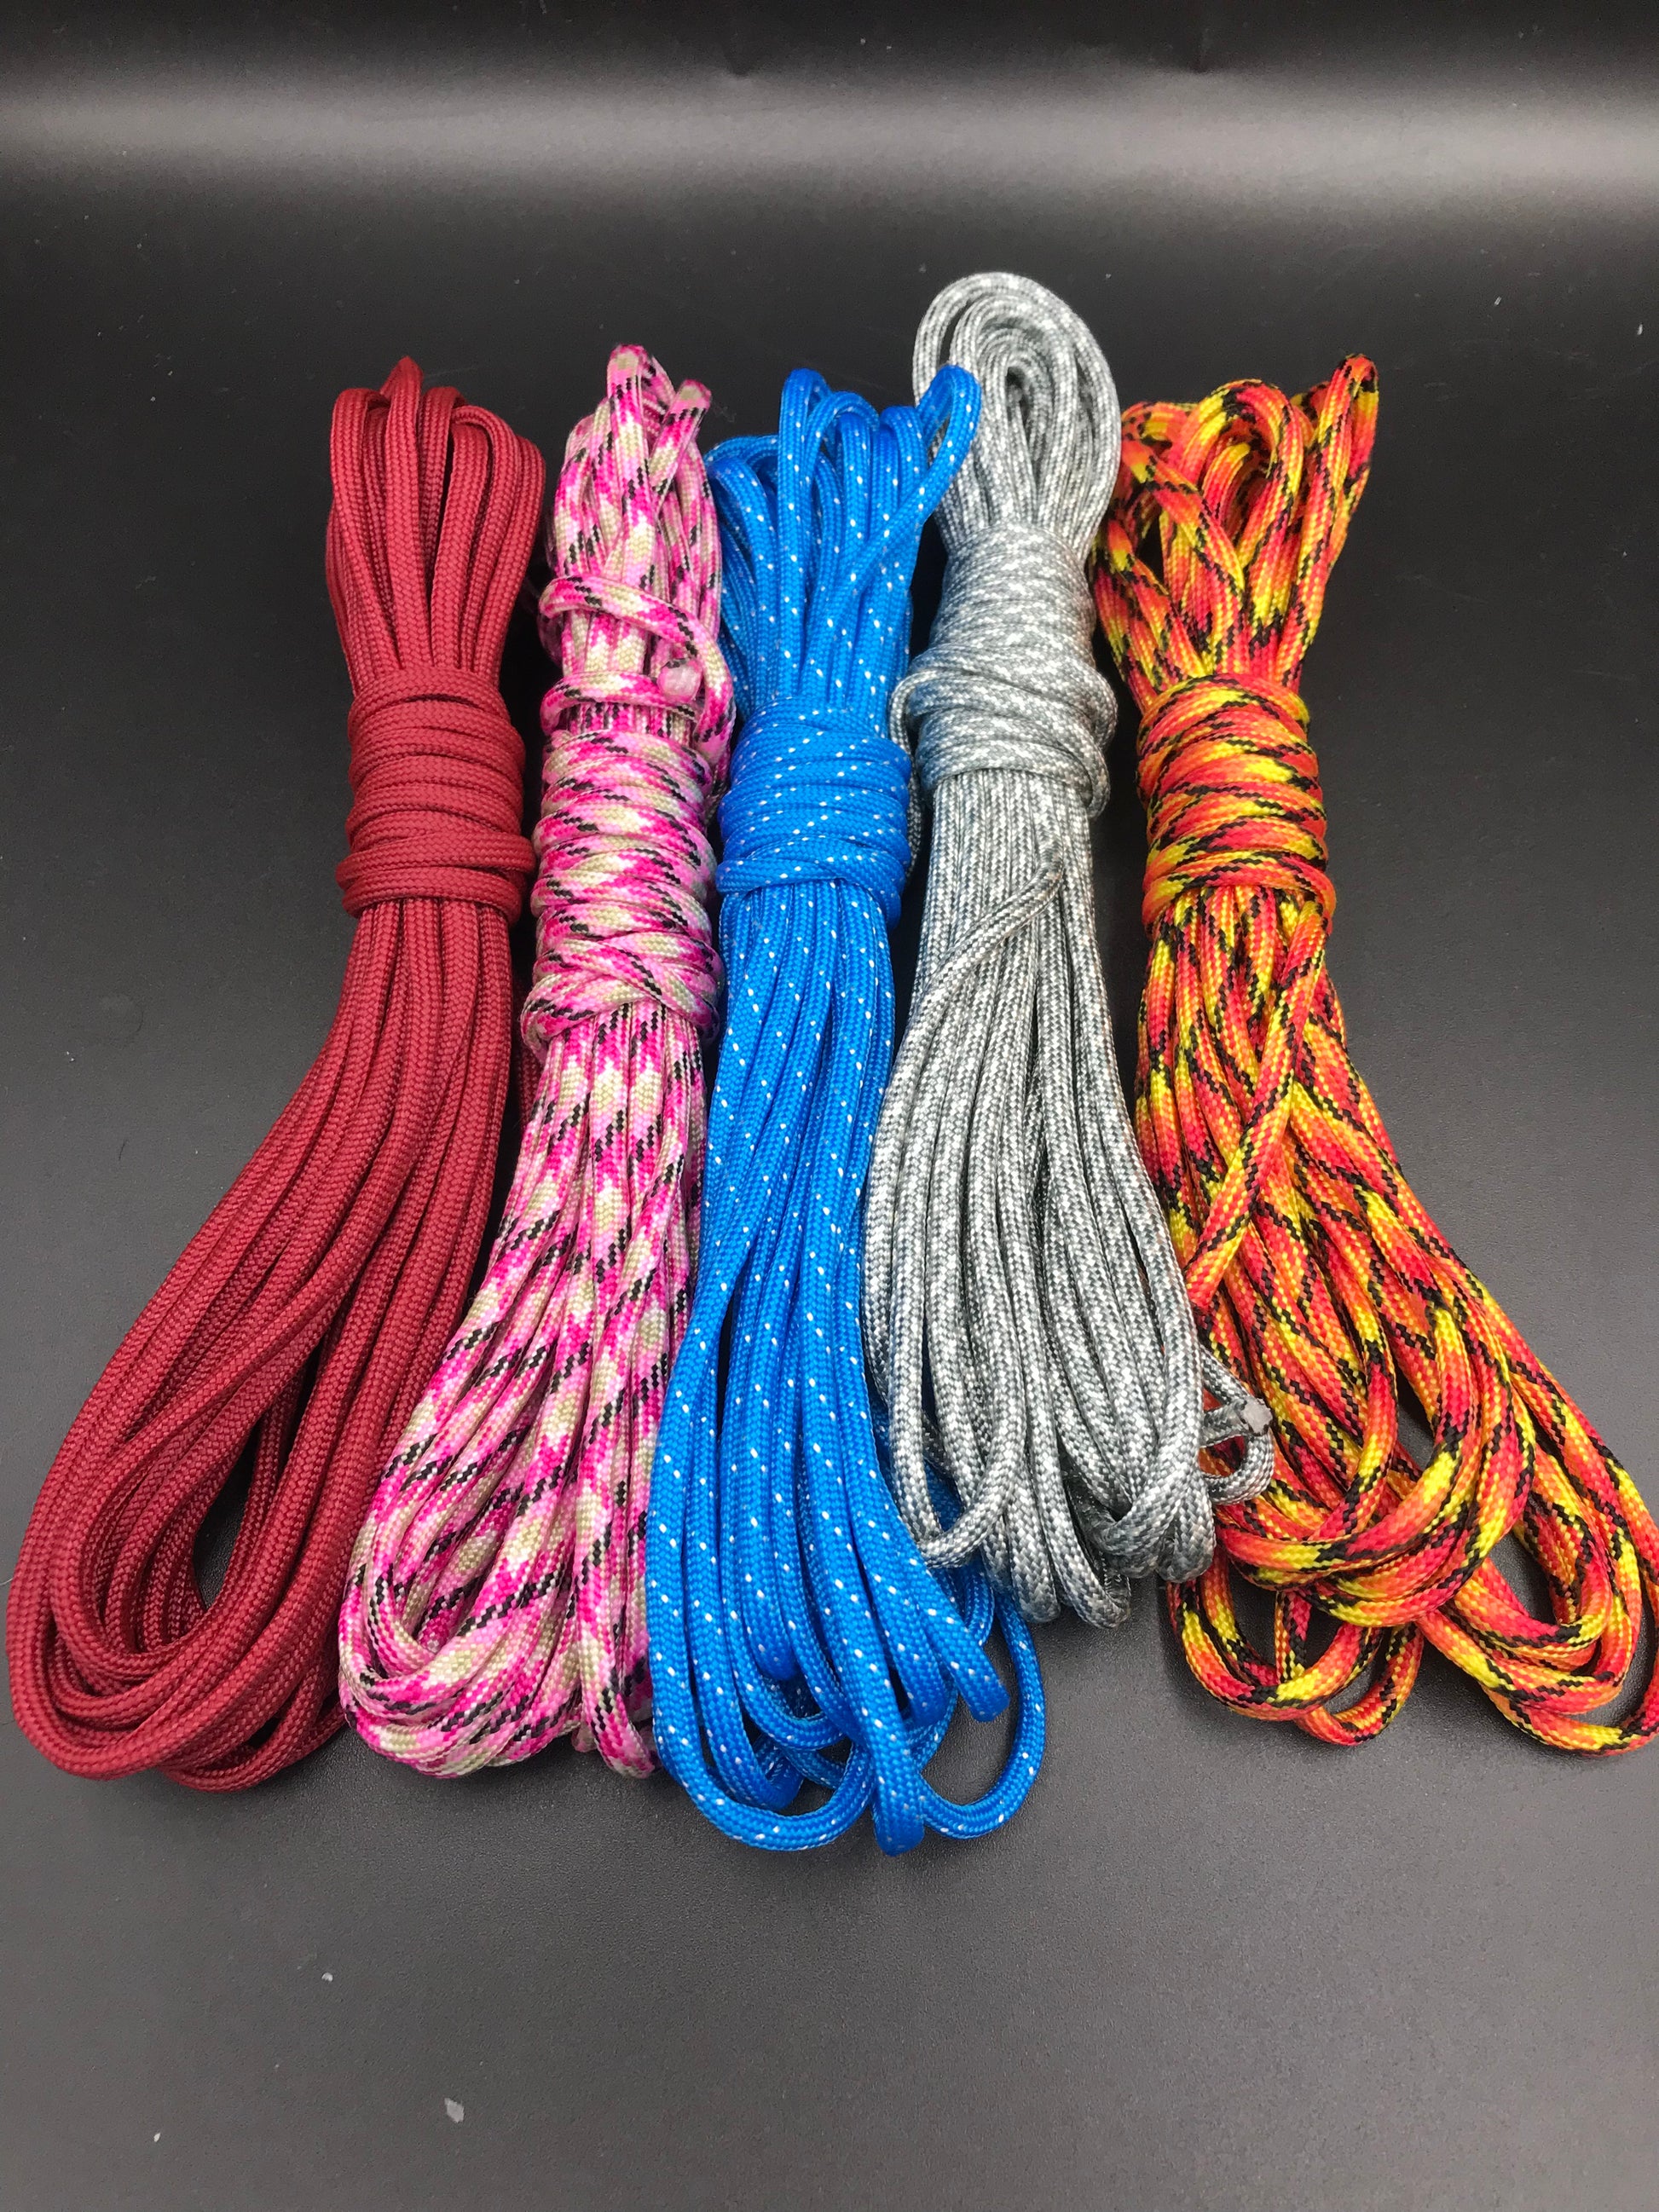 Paracord starter pack in a colour variety of 5 x 20ft bundles ( burgandy wine, hot pink camo, Pixelated grey camo, blue with silver fleck and fireball red